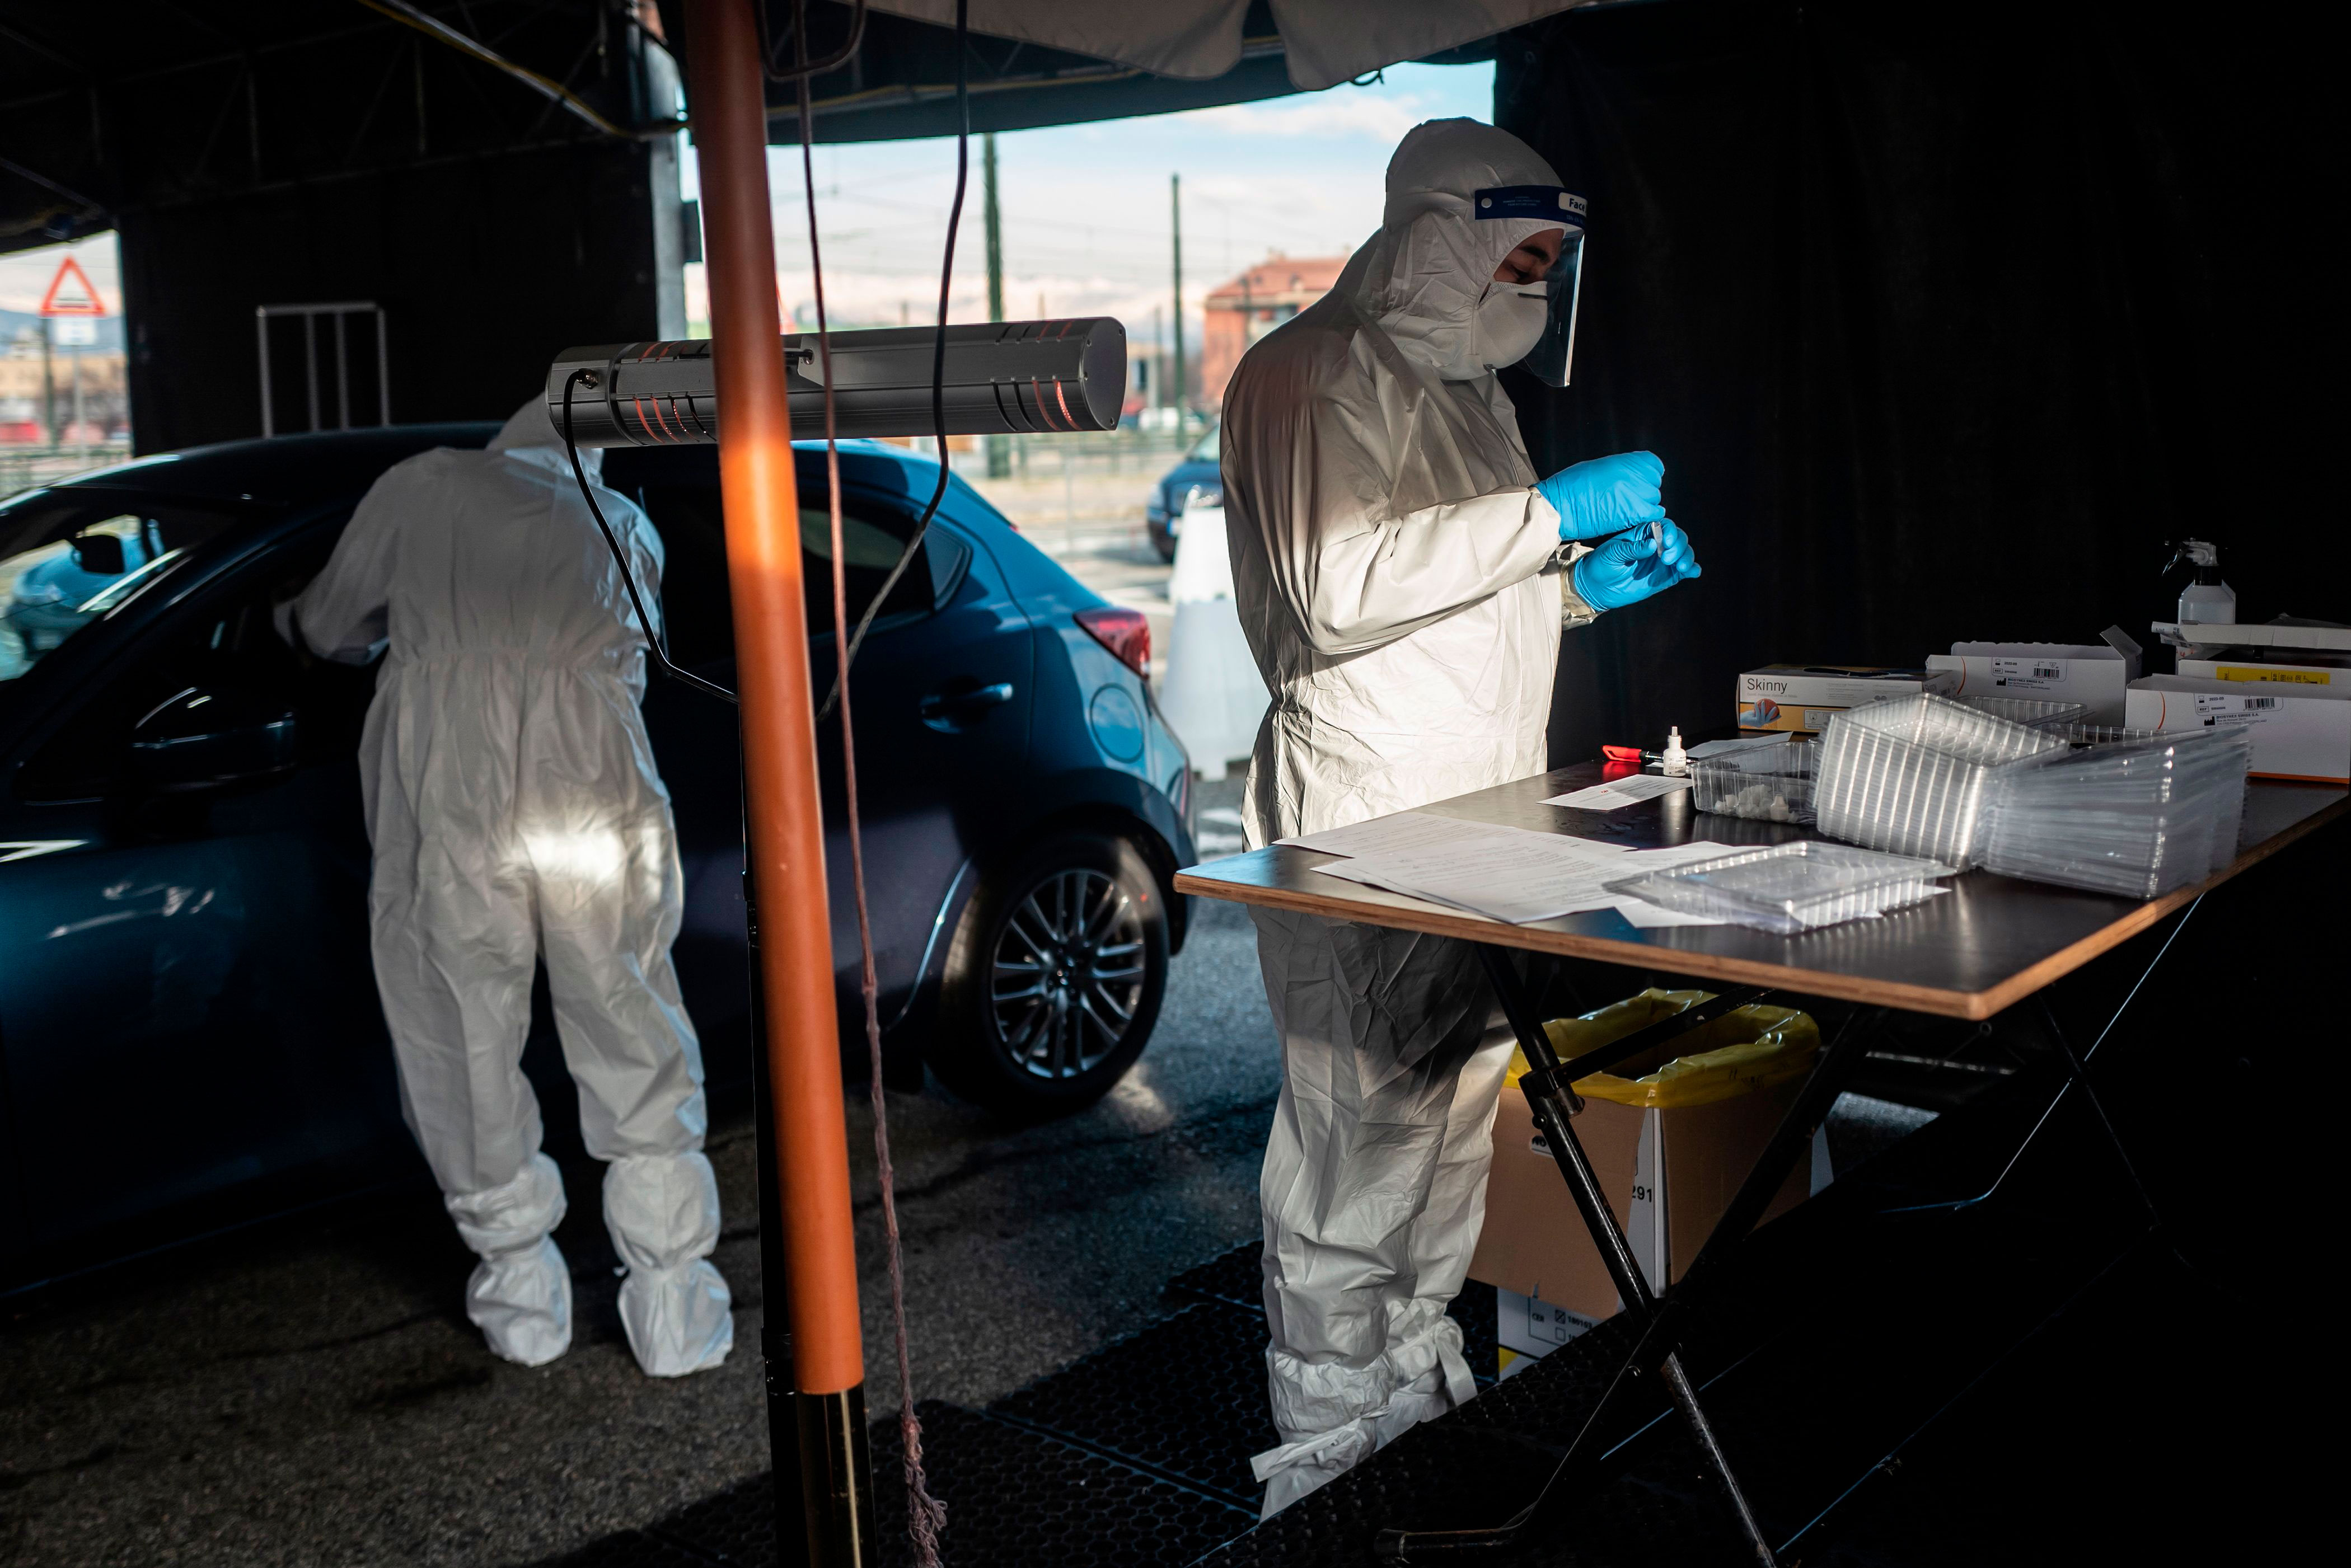 Military medical workers collect swab samples at a drive-thru Covid-19 testing center in Turin, Italy, on January 12.